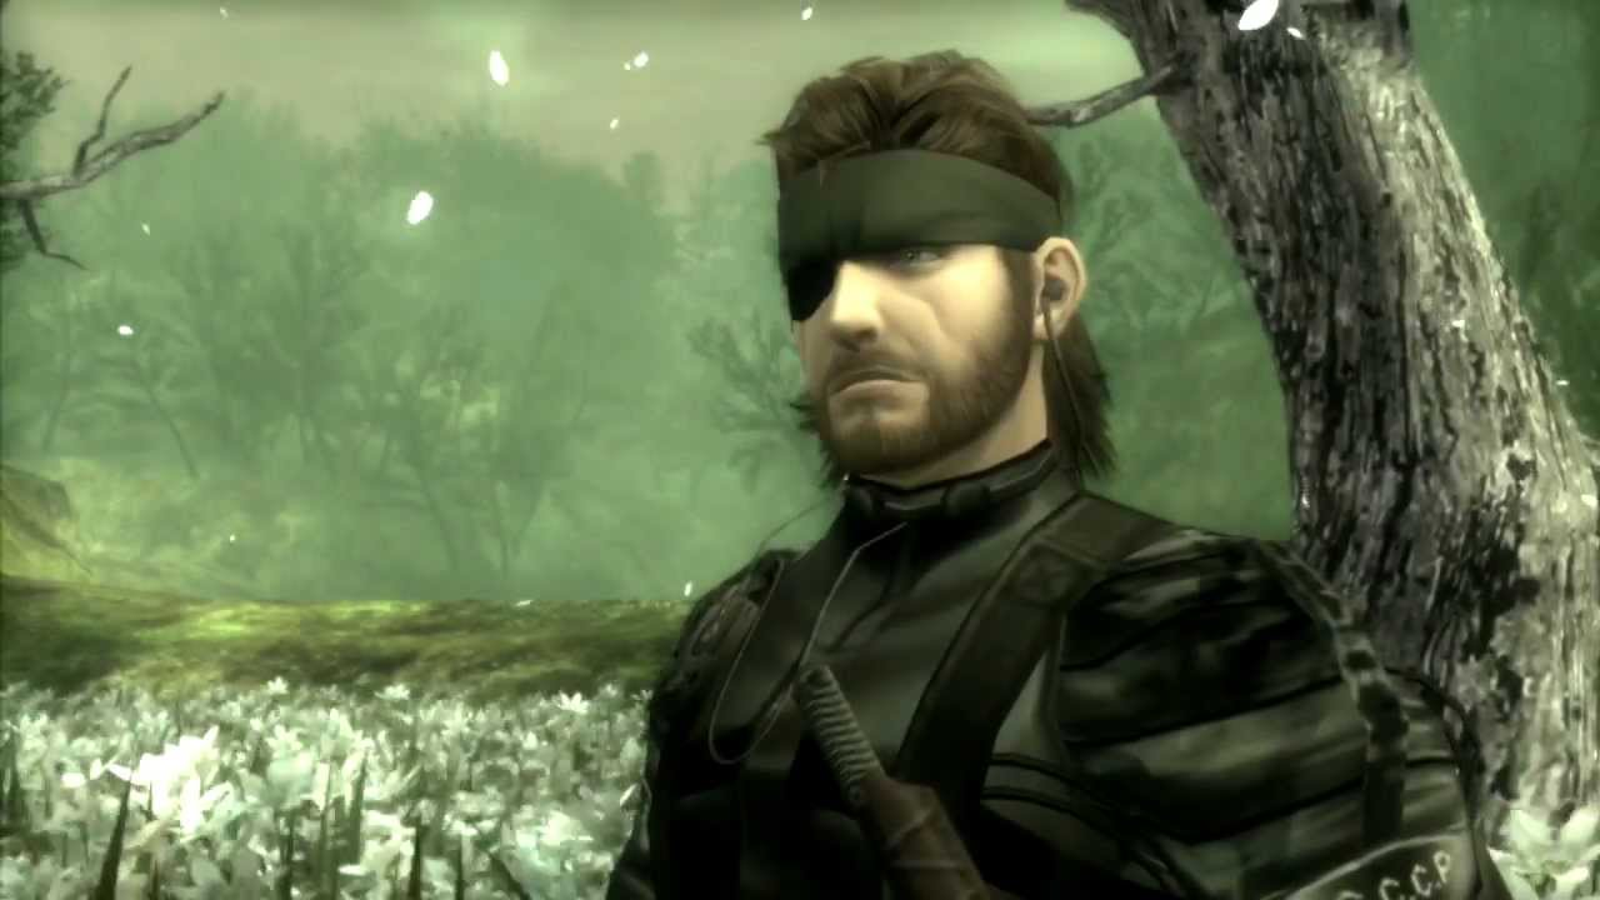 METAL GEAR SOLID Δ: SNAKE EATER on Steam